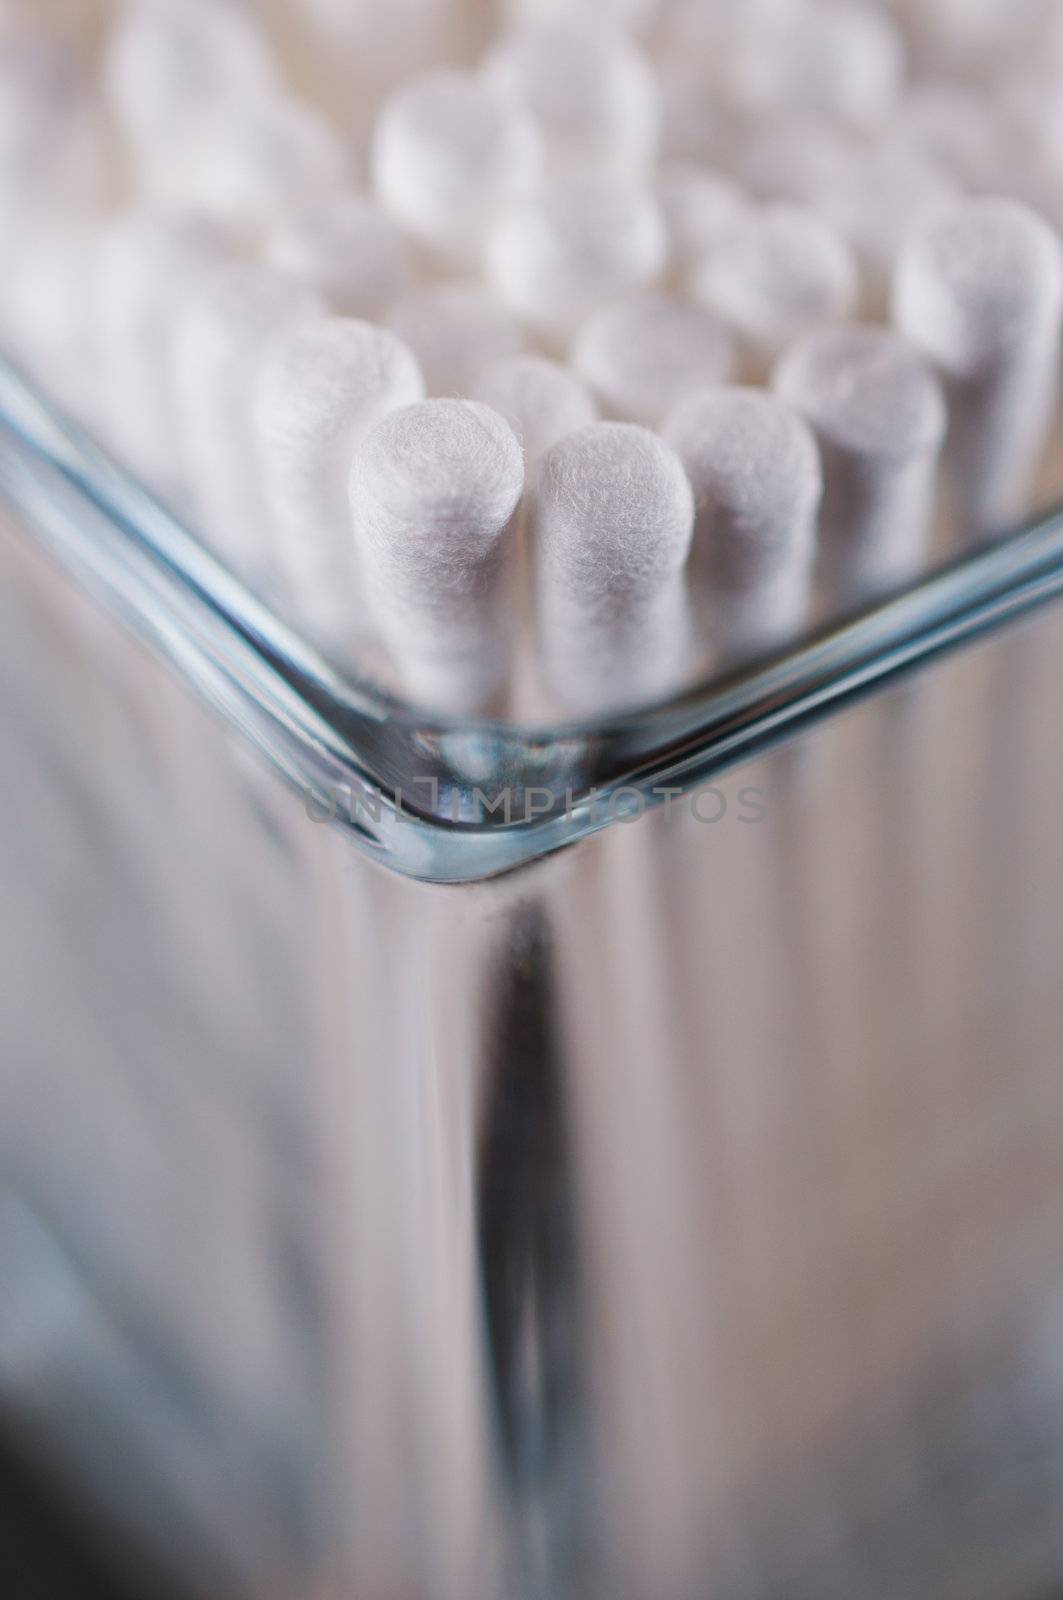 Cotton buds in a glass corner view close up